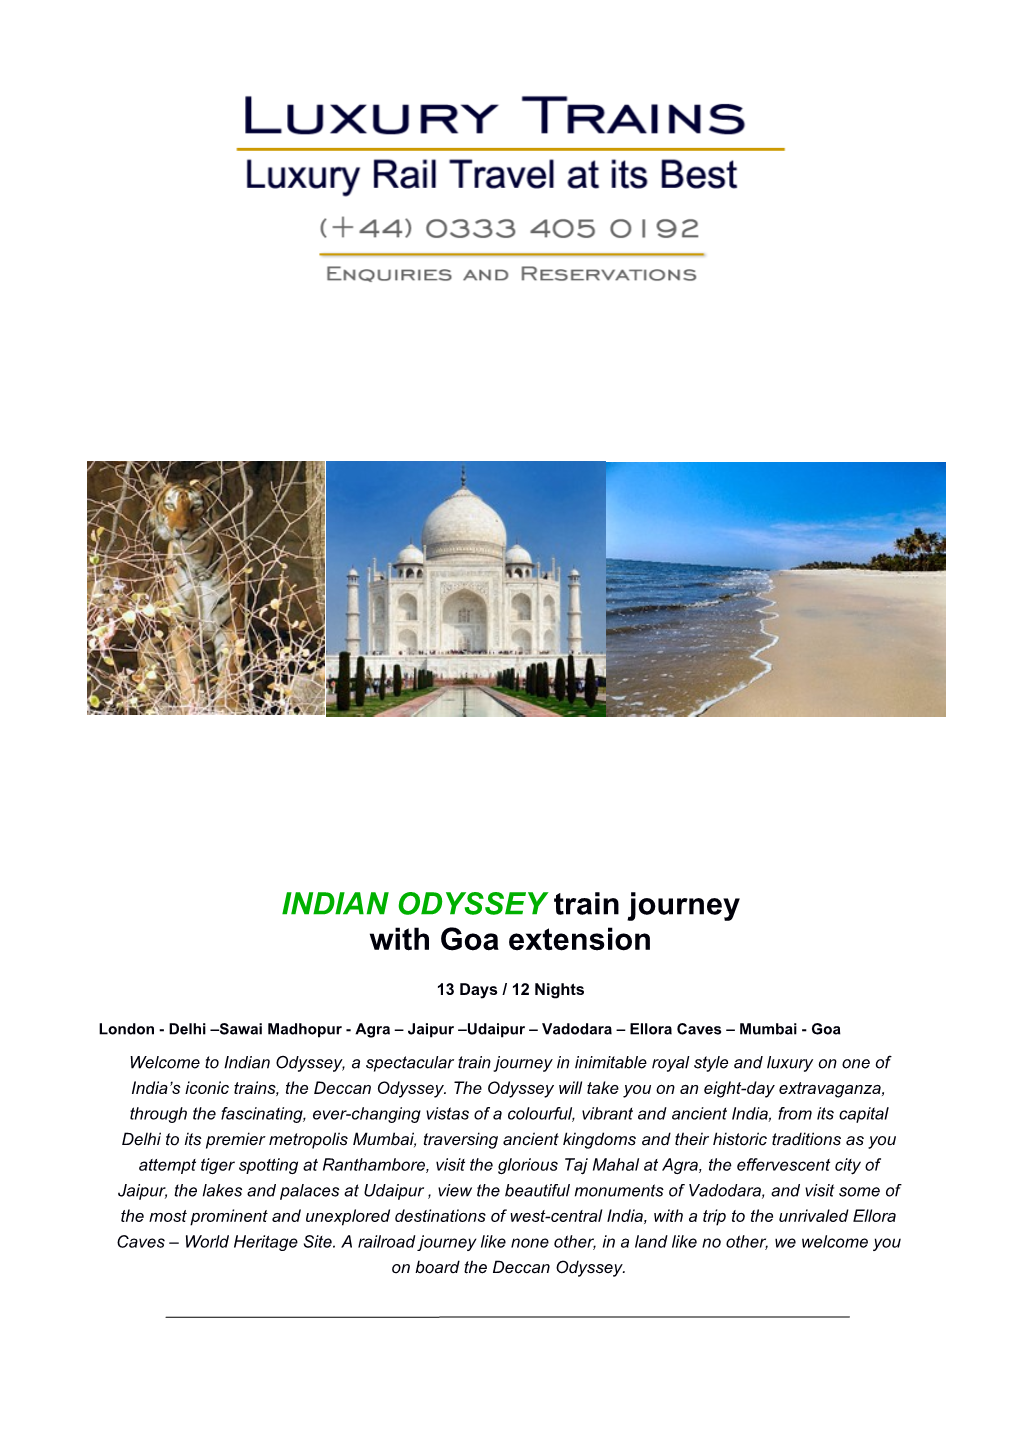 INDIAN ODYSSEY Train Journey with Goa Extension